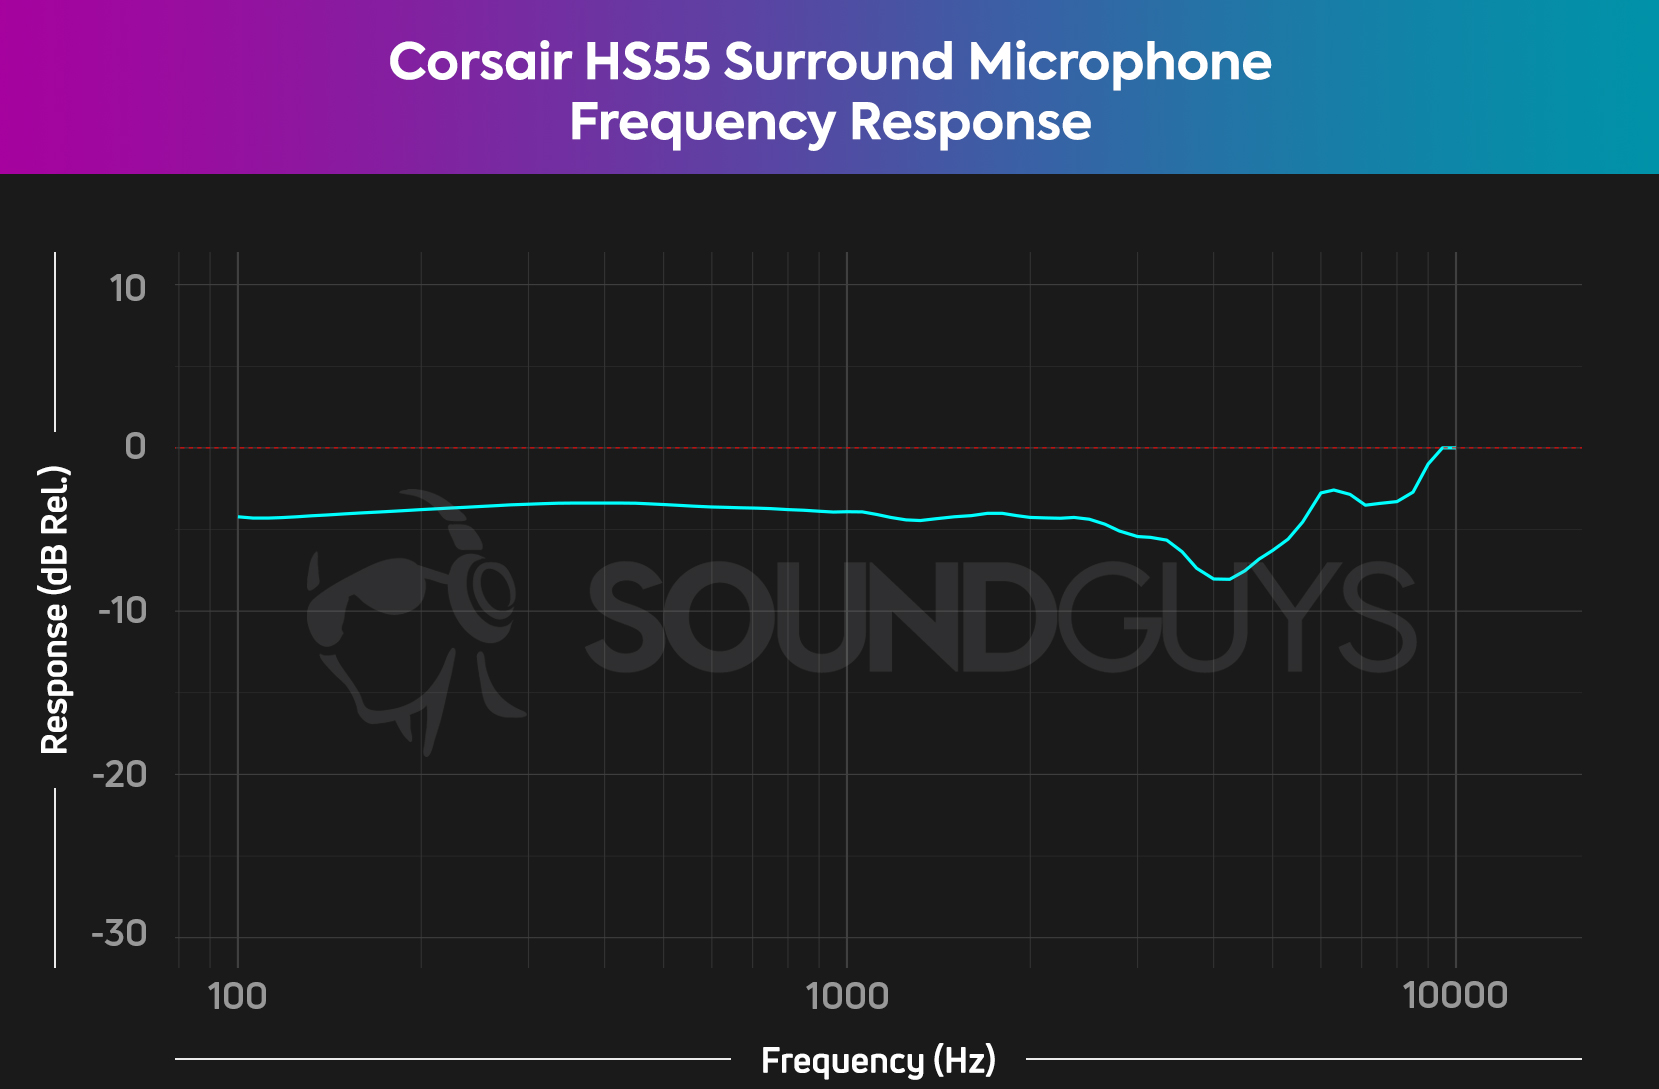 The Corsair HS55 Surround microphone frequency response, showing a generally flat response up to the high end.